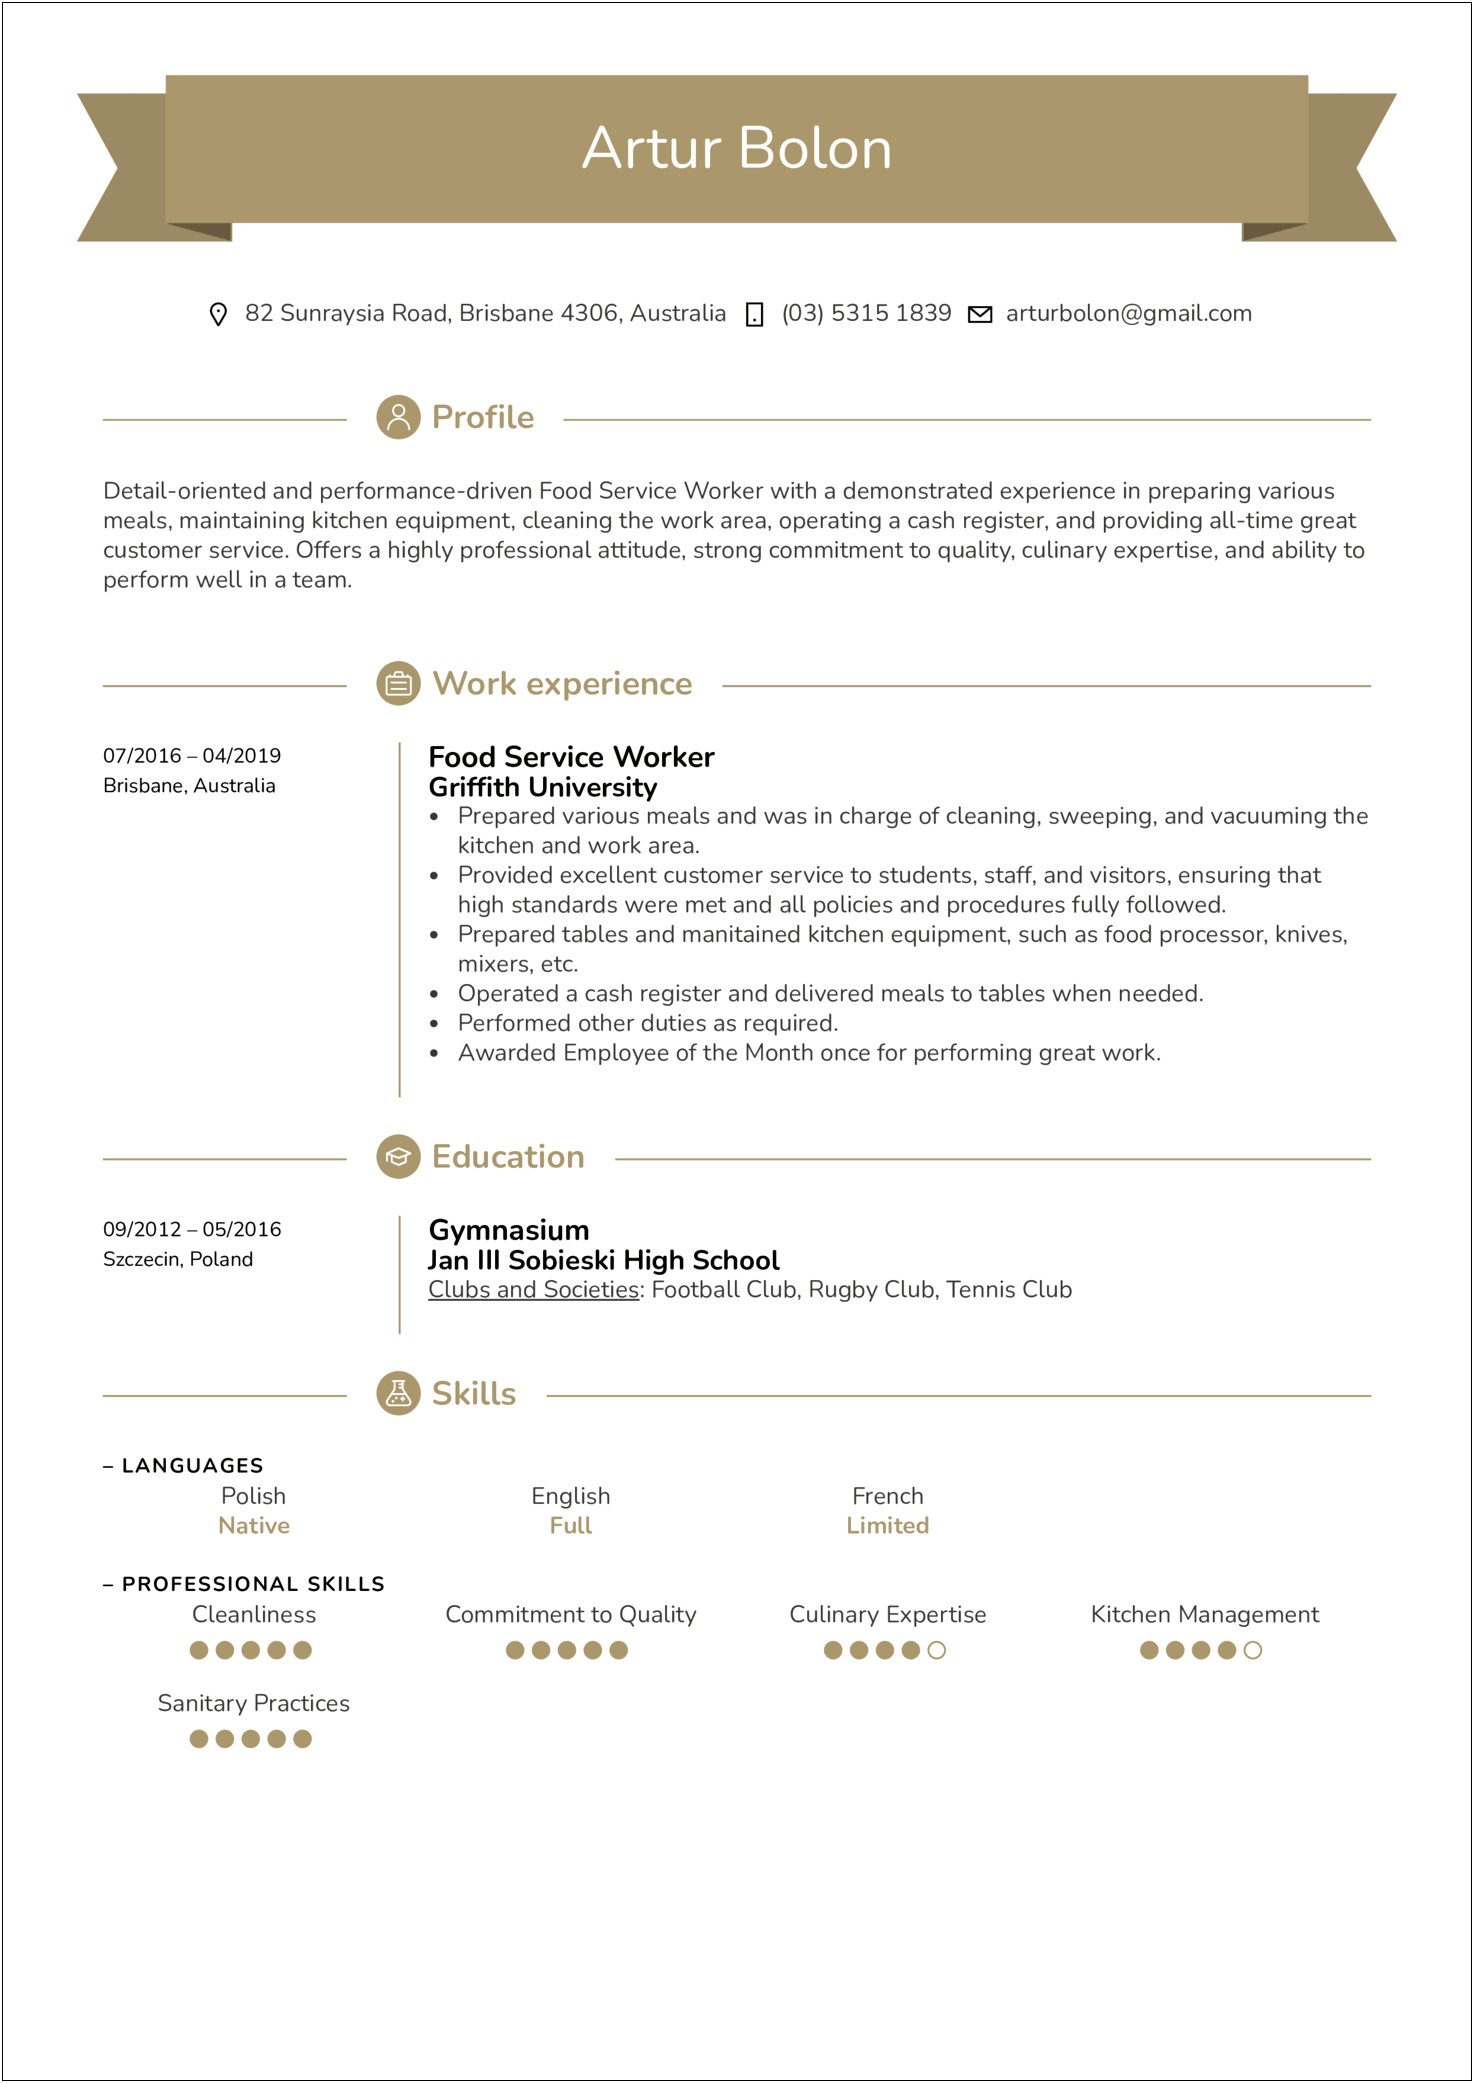 Skills For Resume Examples For Food Service